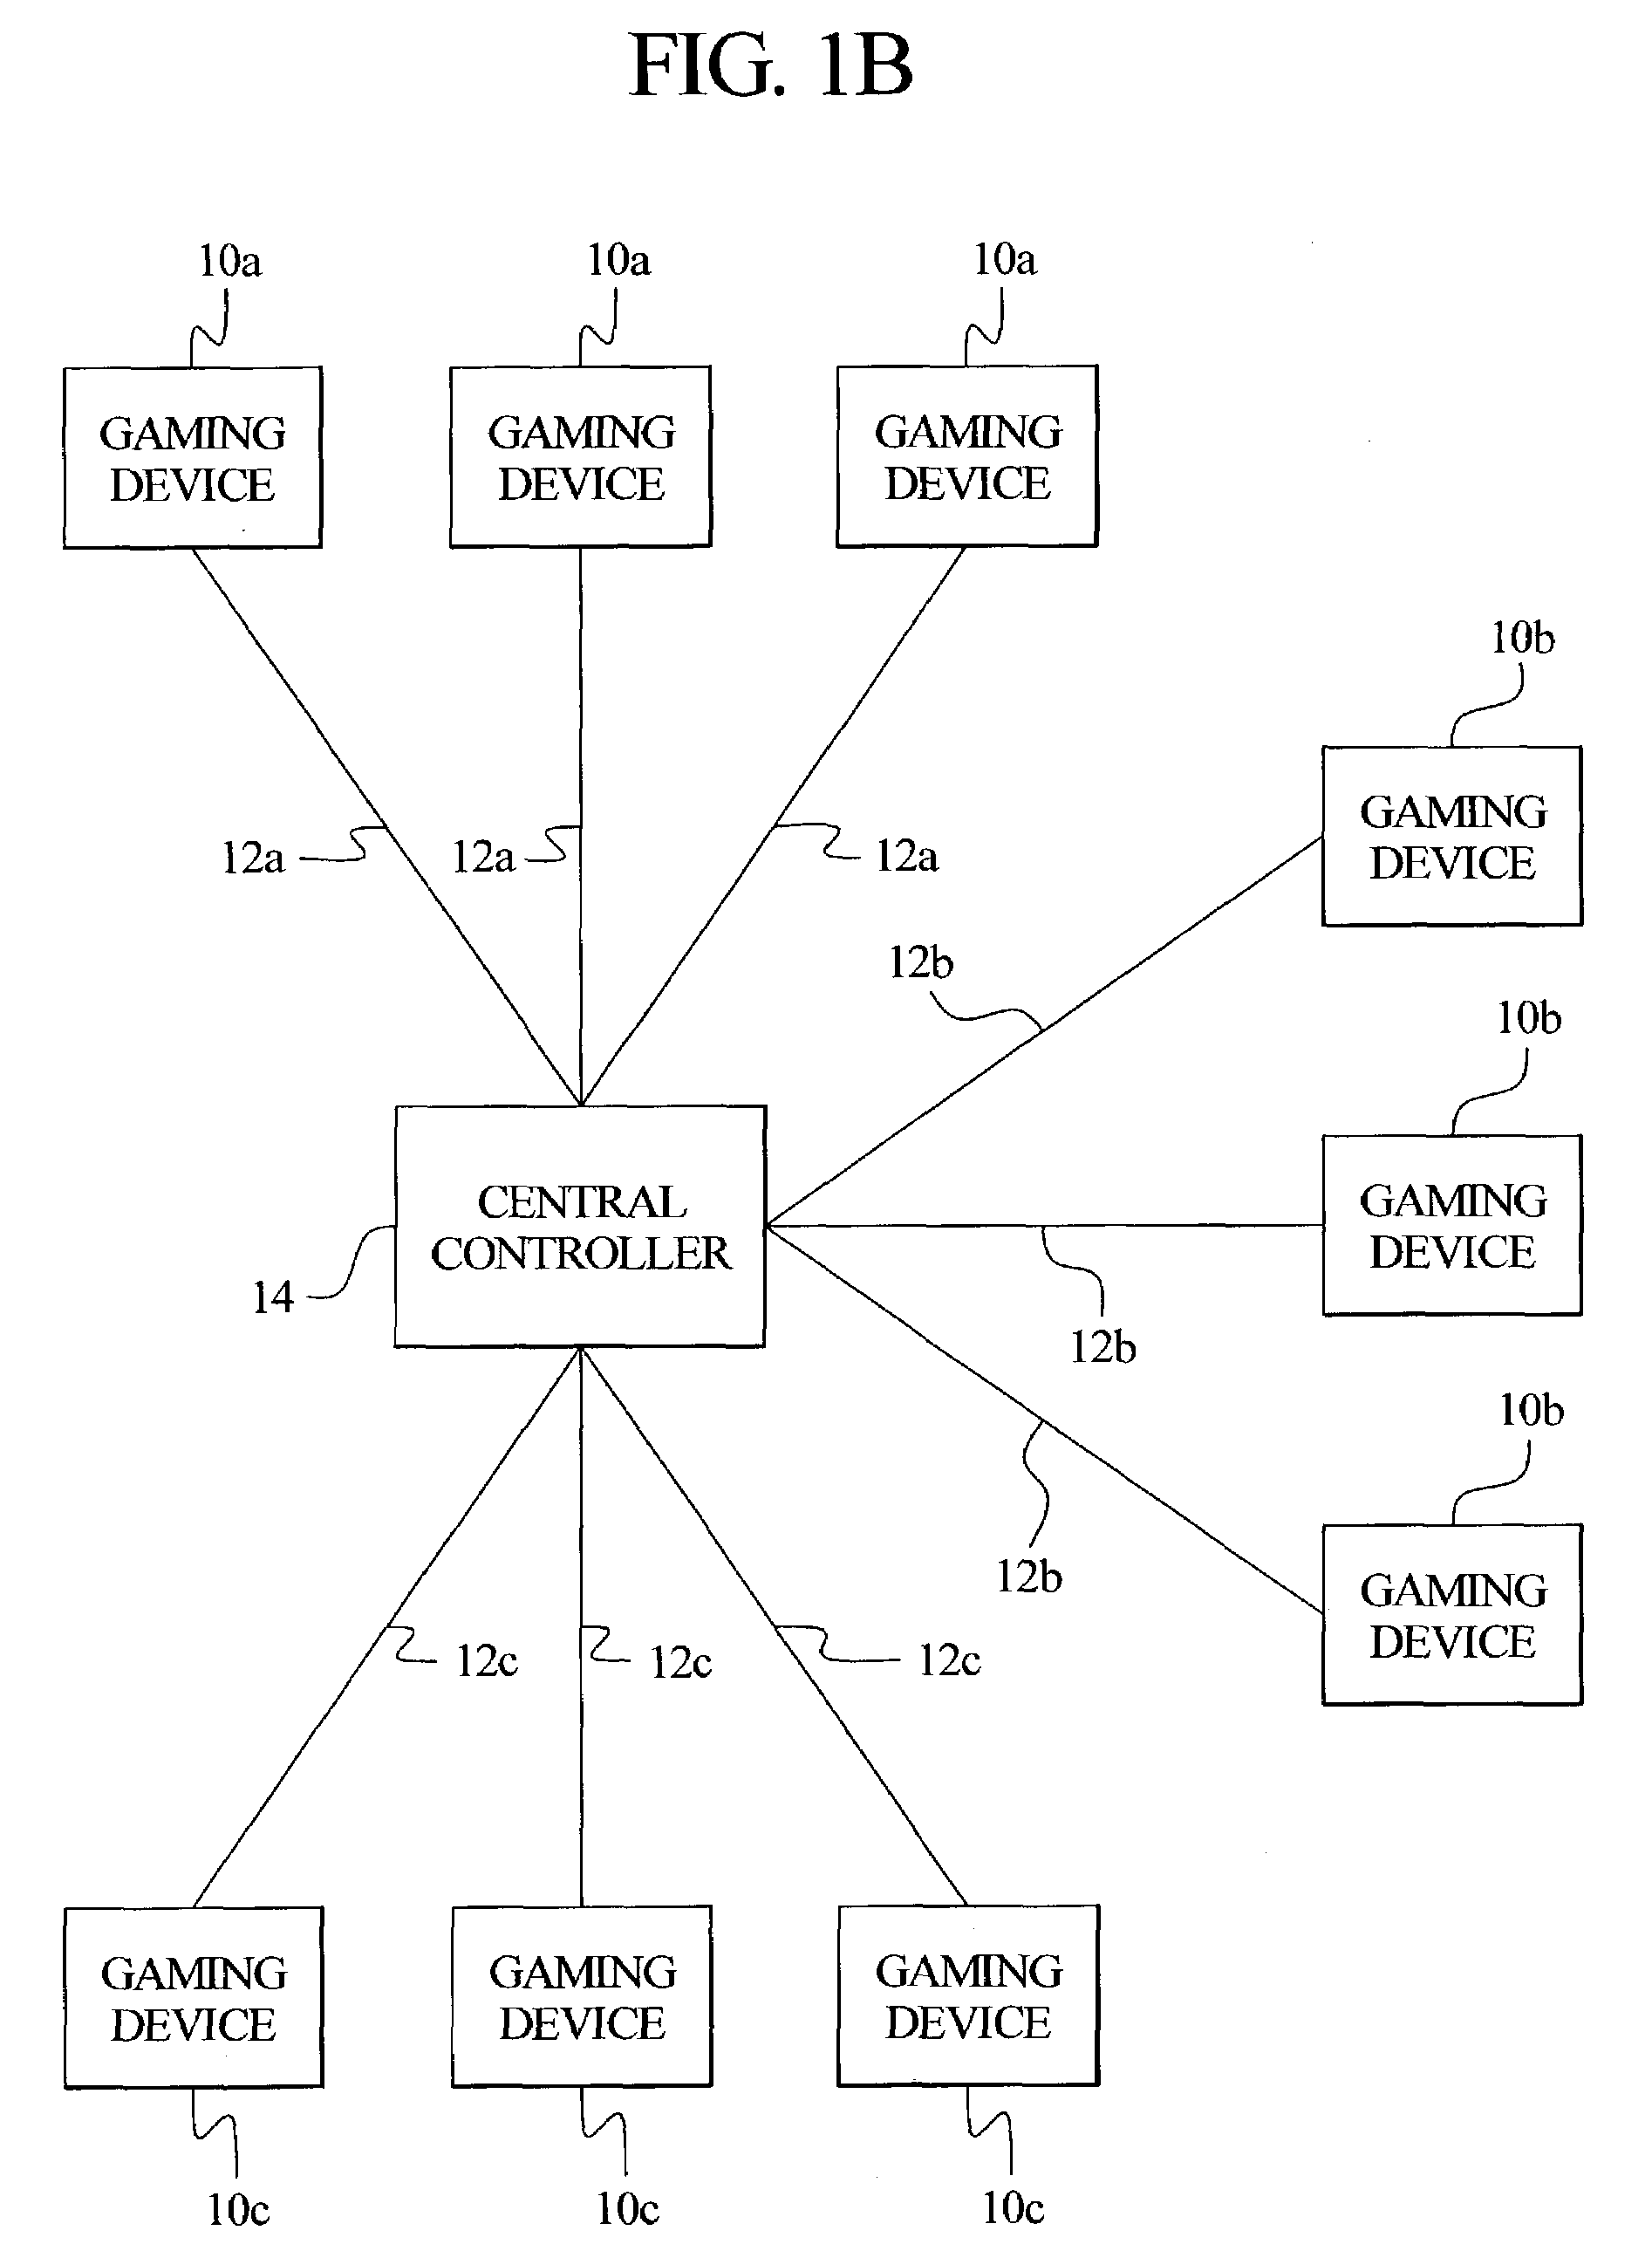 Central determination gaming system with a game outcome generated by a gaming terminal and approved by a central controller